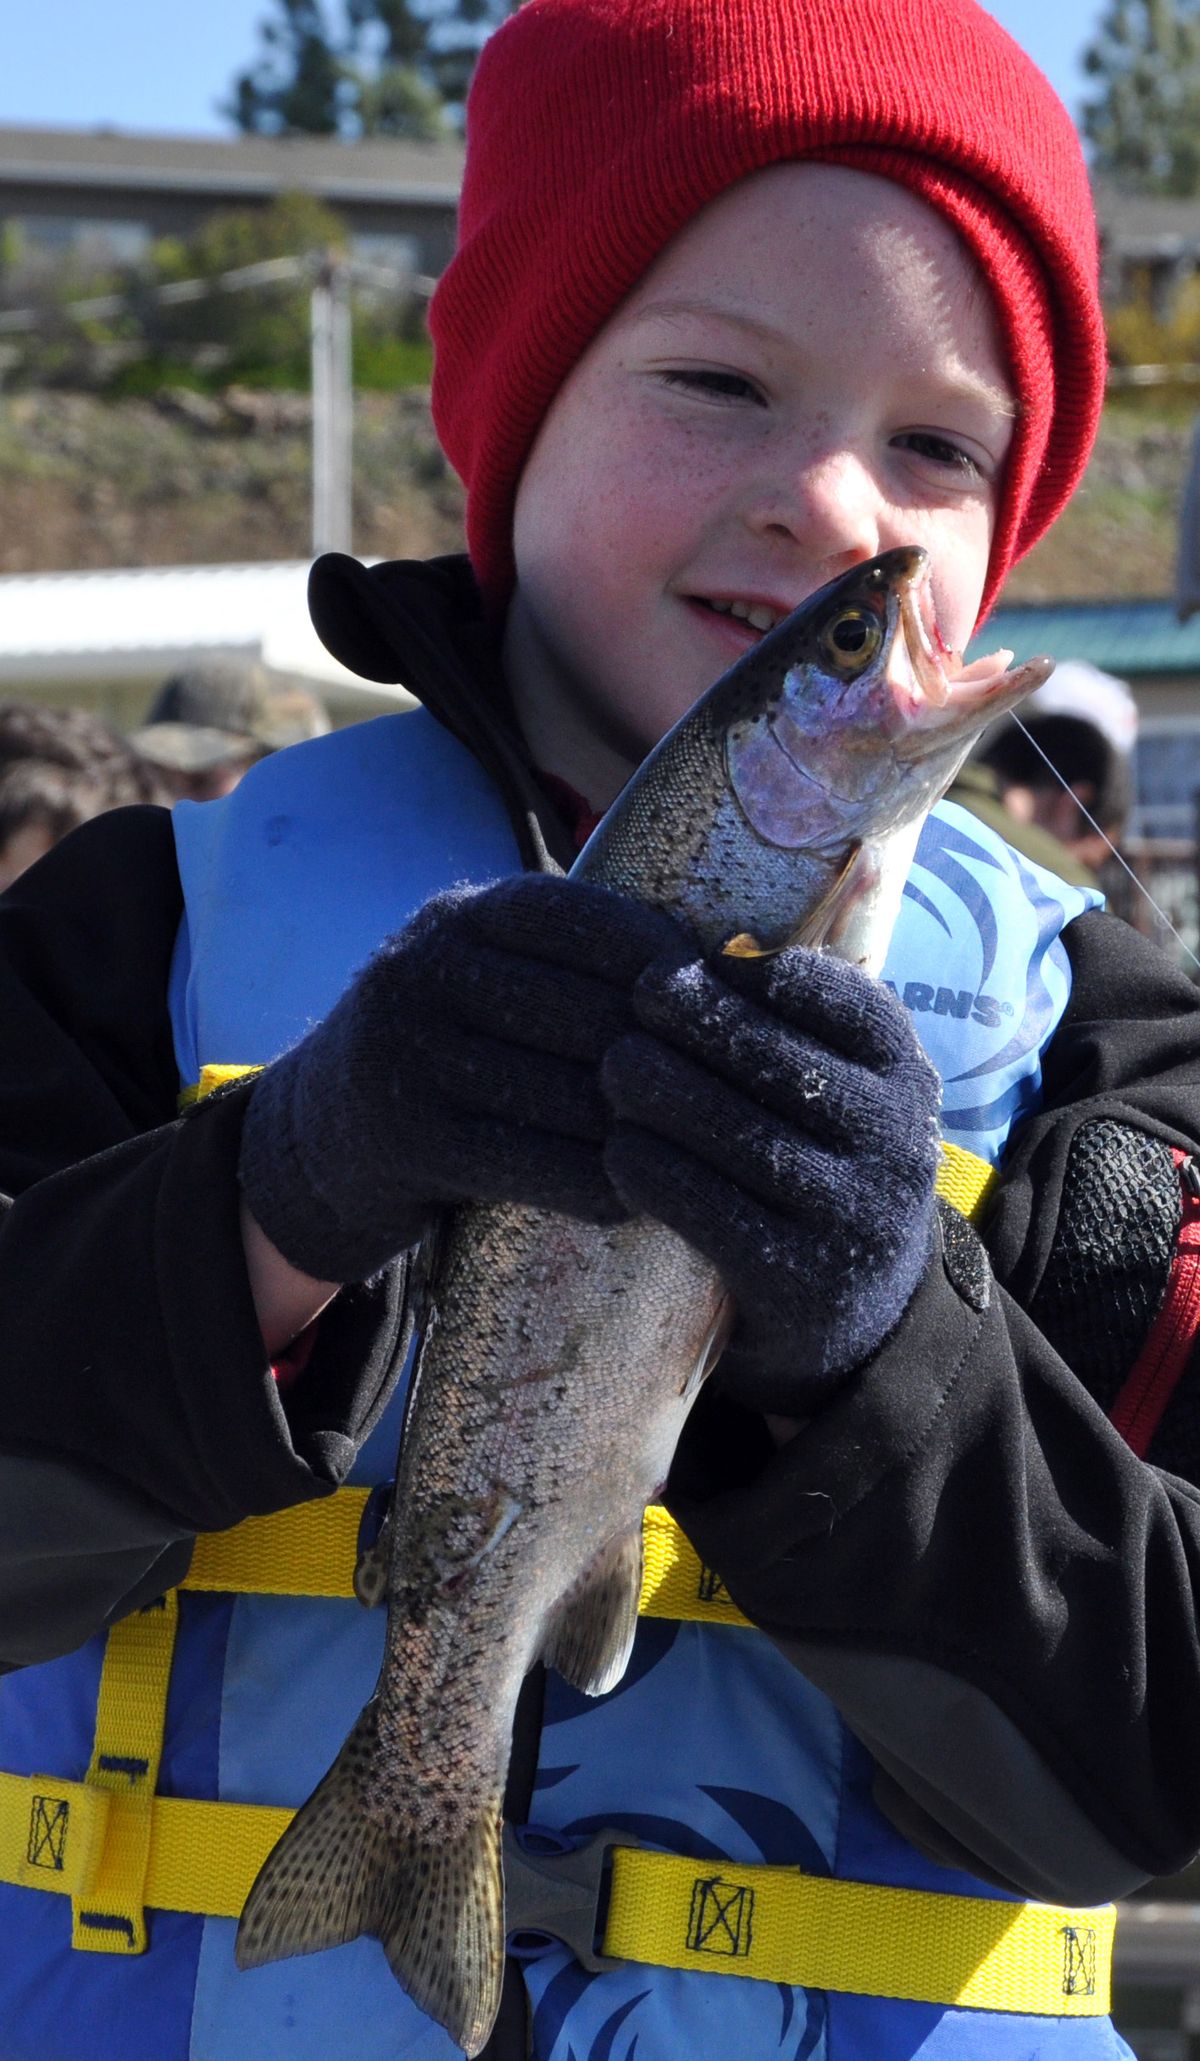 Justin Meadows, 5, of Spokane, prizes his first trout, caught off the dock at Klink’s Williams Lake Resort on Saturday. (Rich Landers)